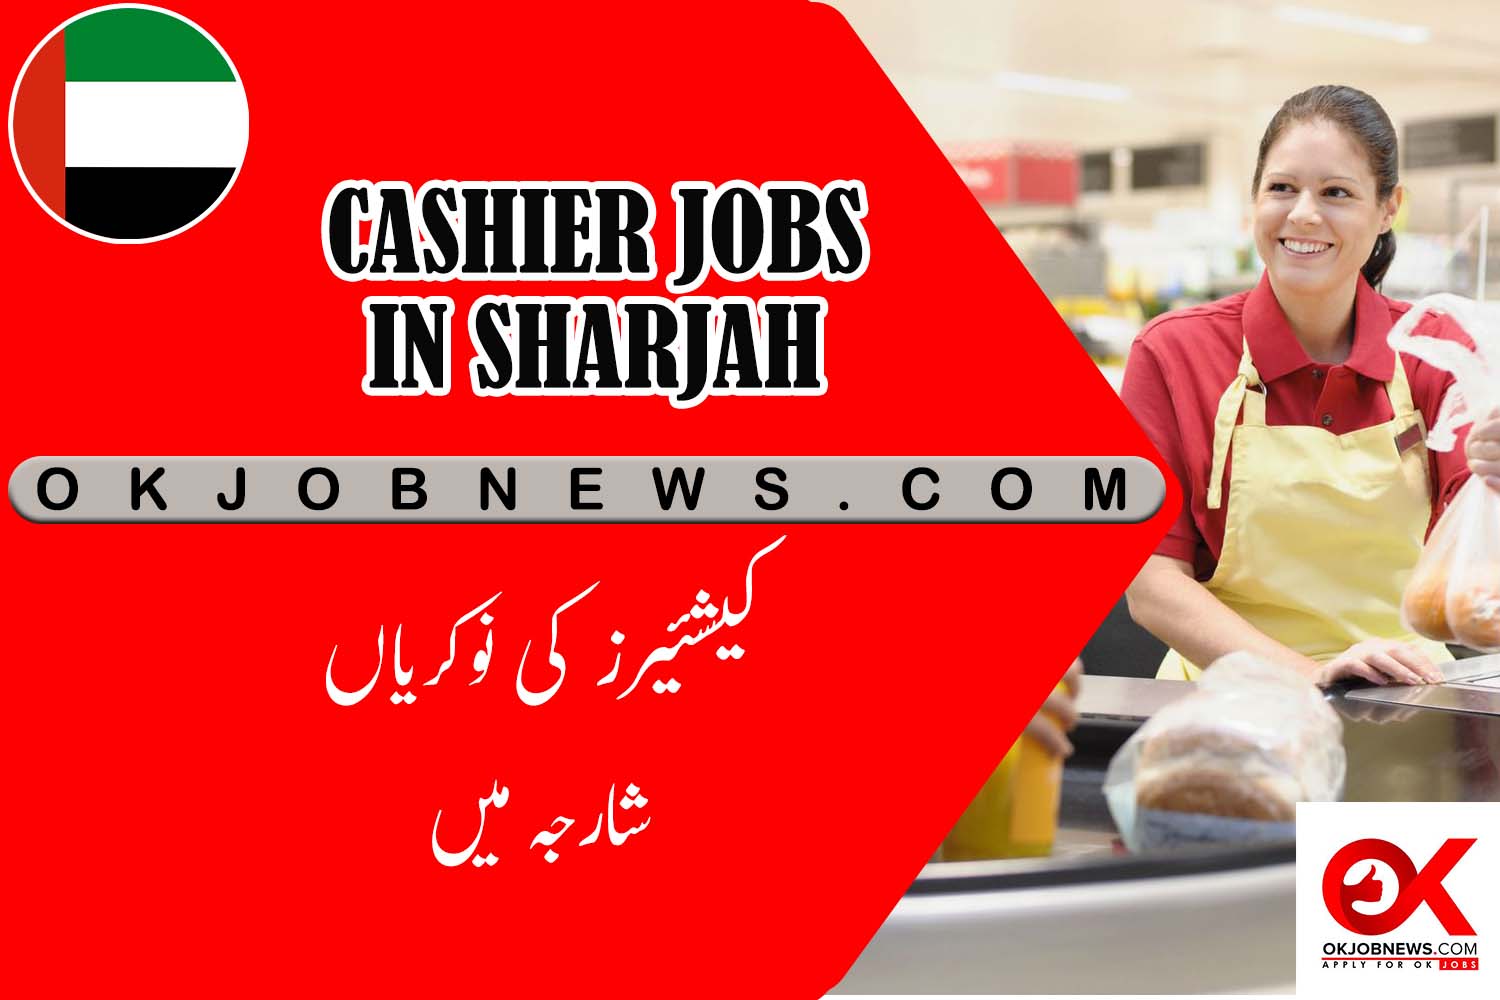 Cashier Jobs in Sharjah Everything You Need to Know